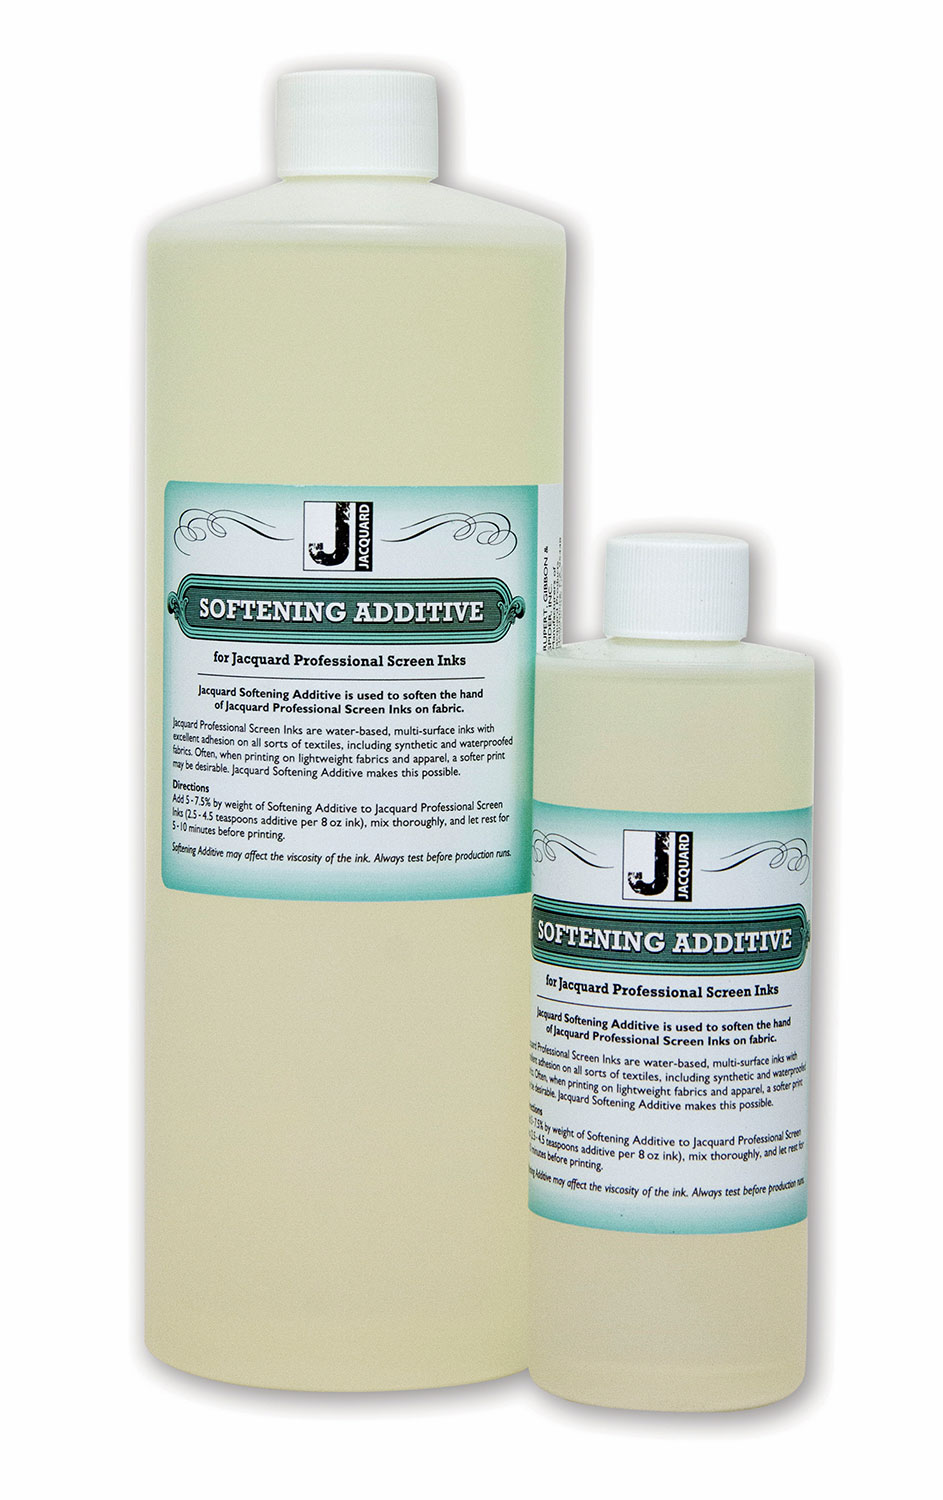 Rainbow Silks : Jacquard Synthrapol 236ml in Chemicals for use